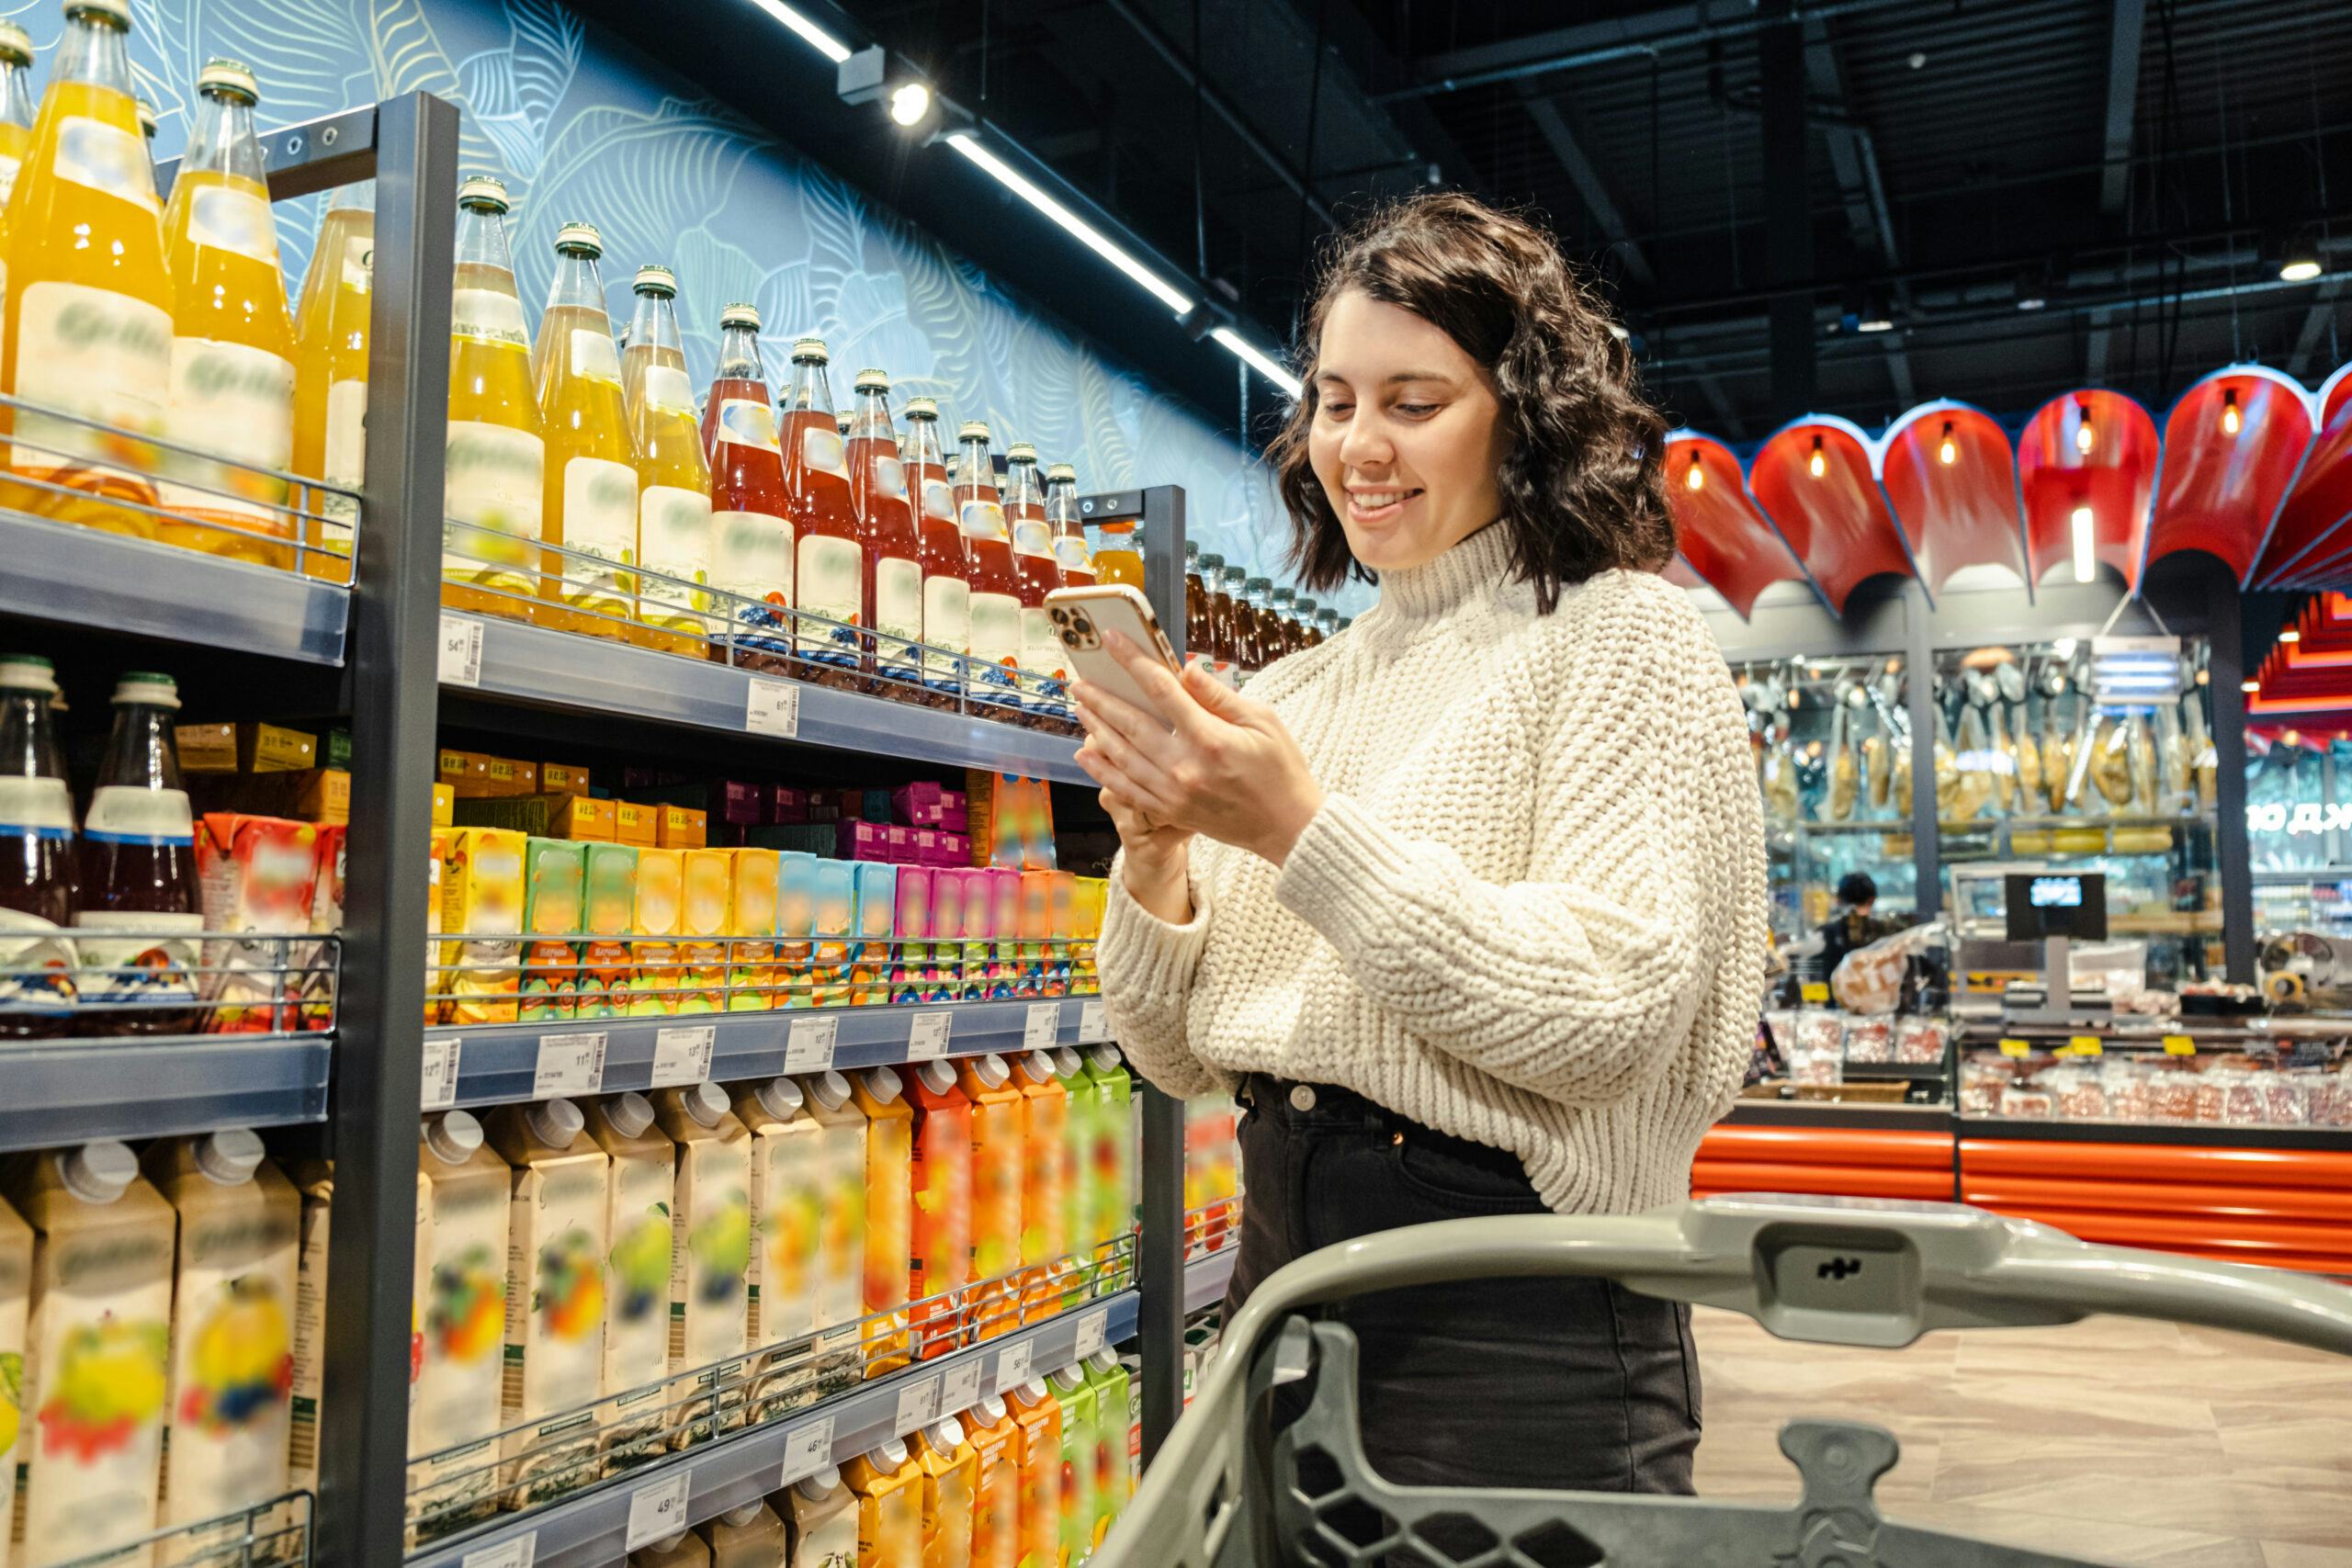 Woman shops juice using phone grocery list in supermarket